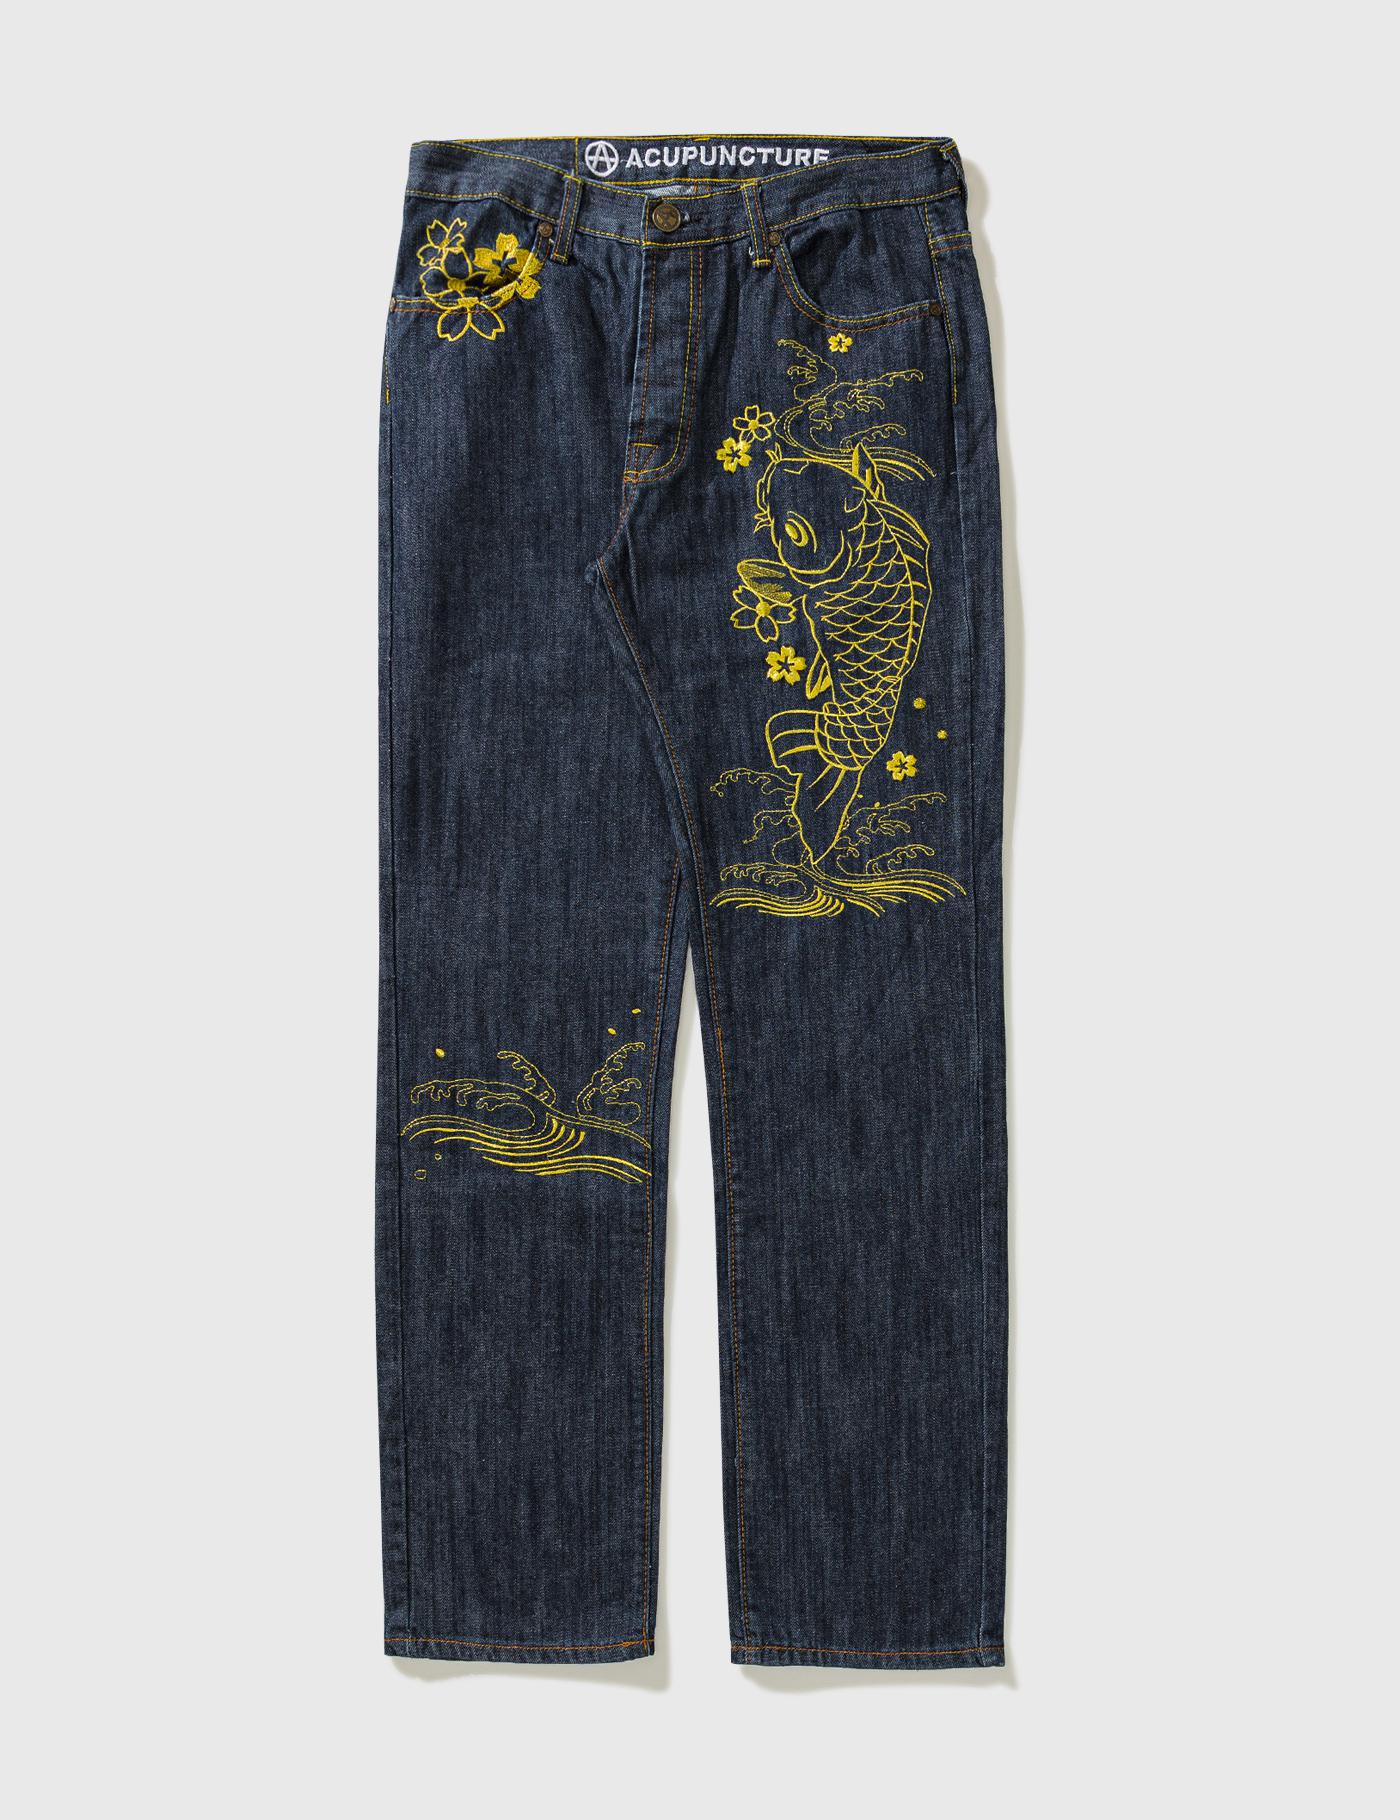 Acupuncture With Gold Embroidery Jeans by ACUPUNCTURE